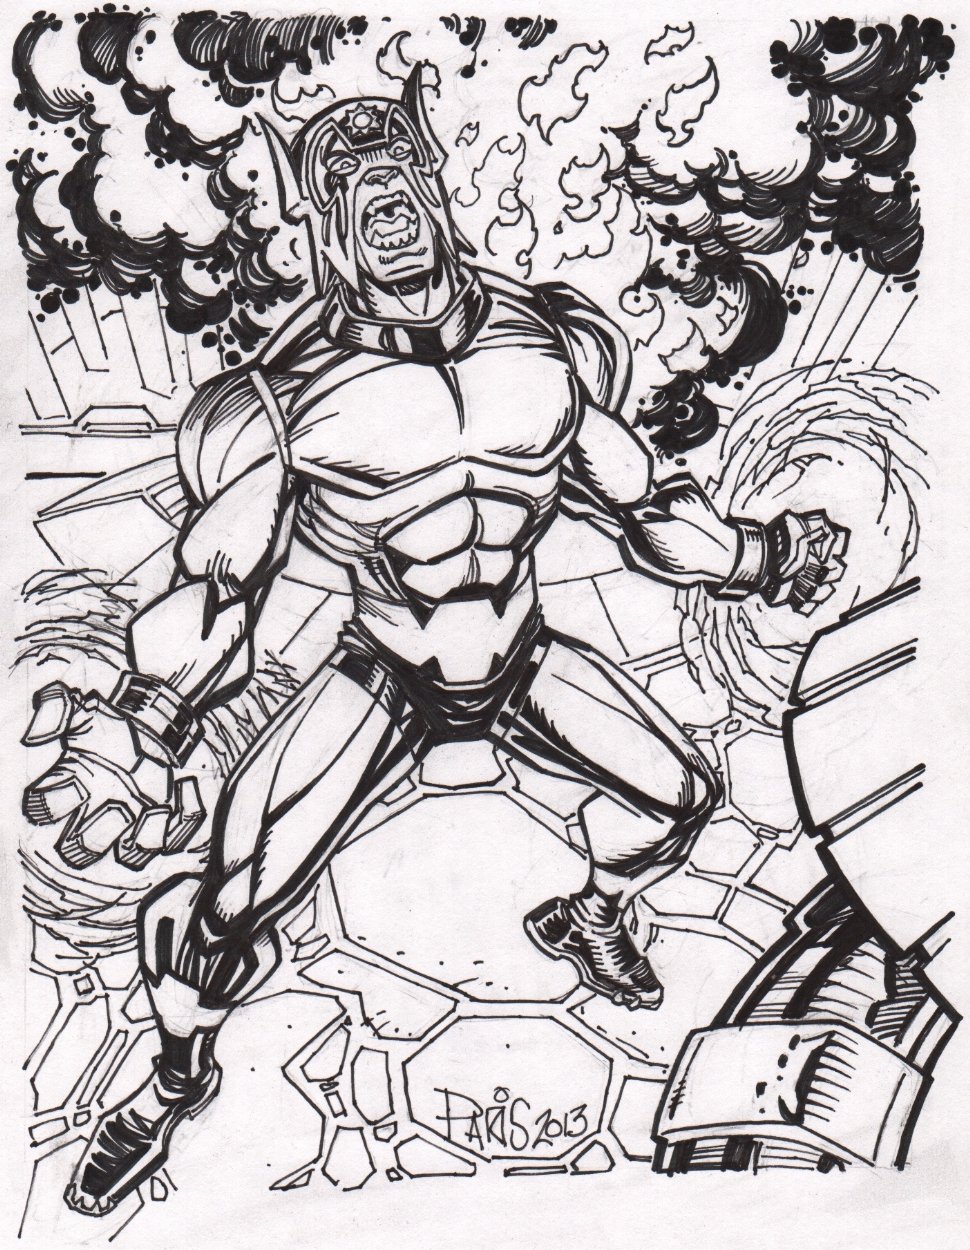 Orion of the New Gods, in R Lee's Paris Cullins Comic Art Gallery Room